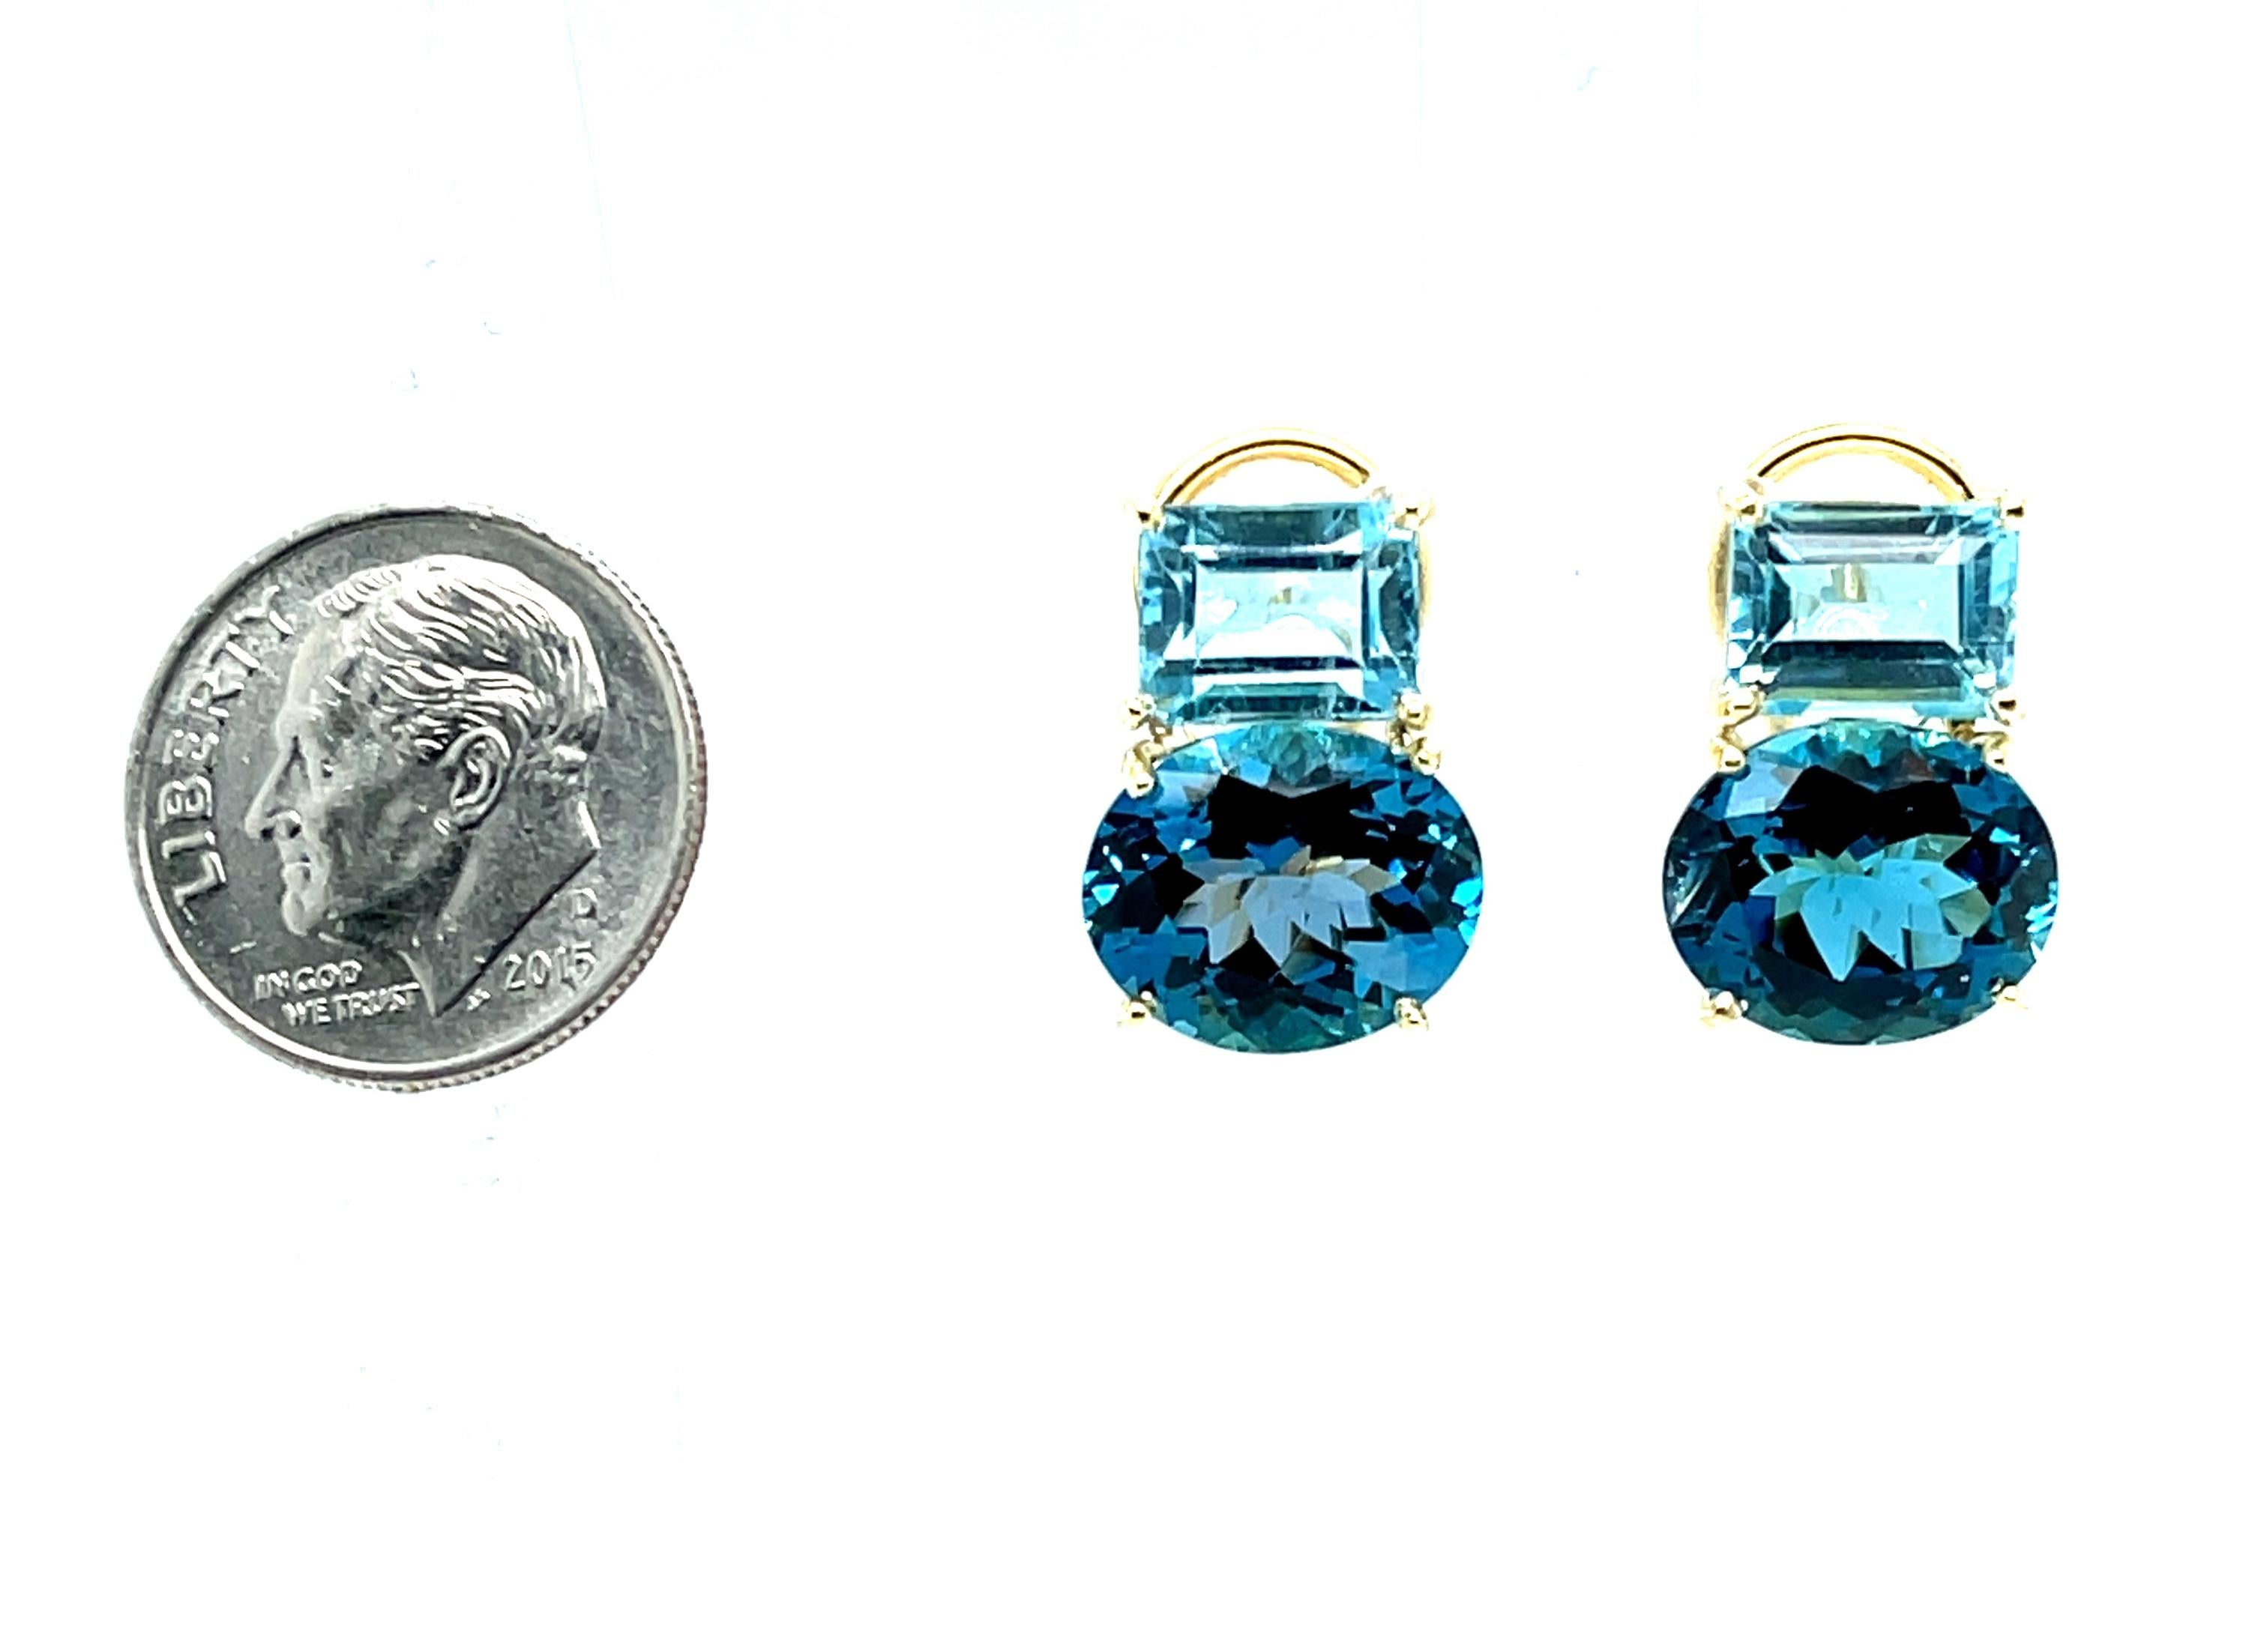 Swiss and Sky Blue Topaz Earrings in 18k Yellow Gold with French Clips 1